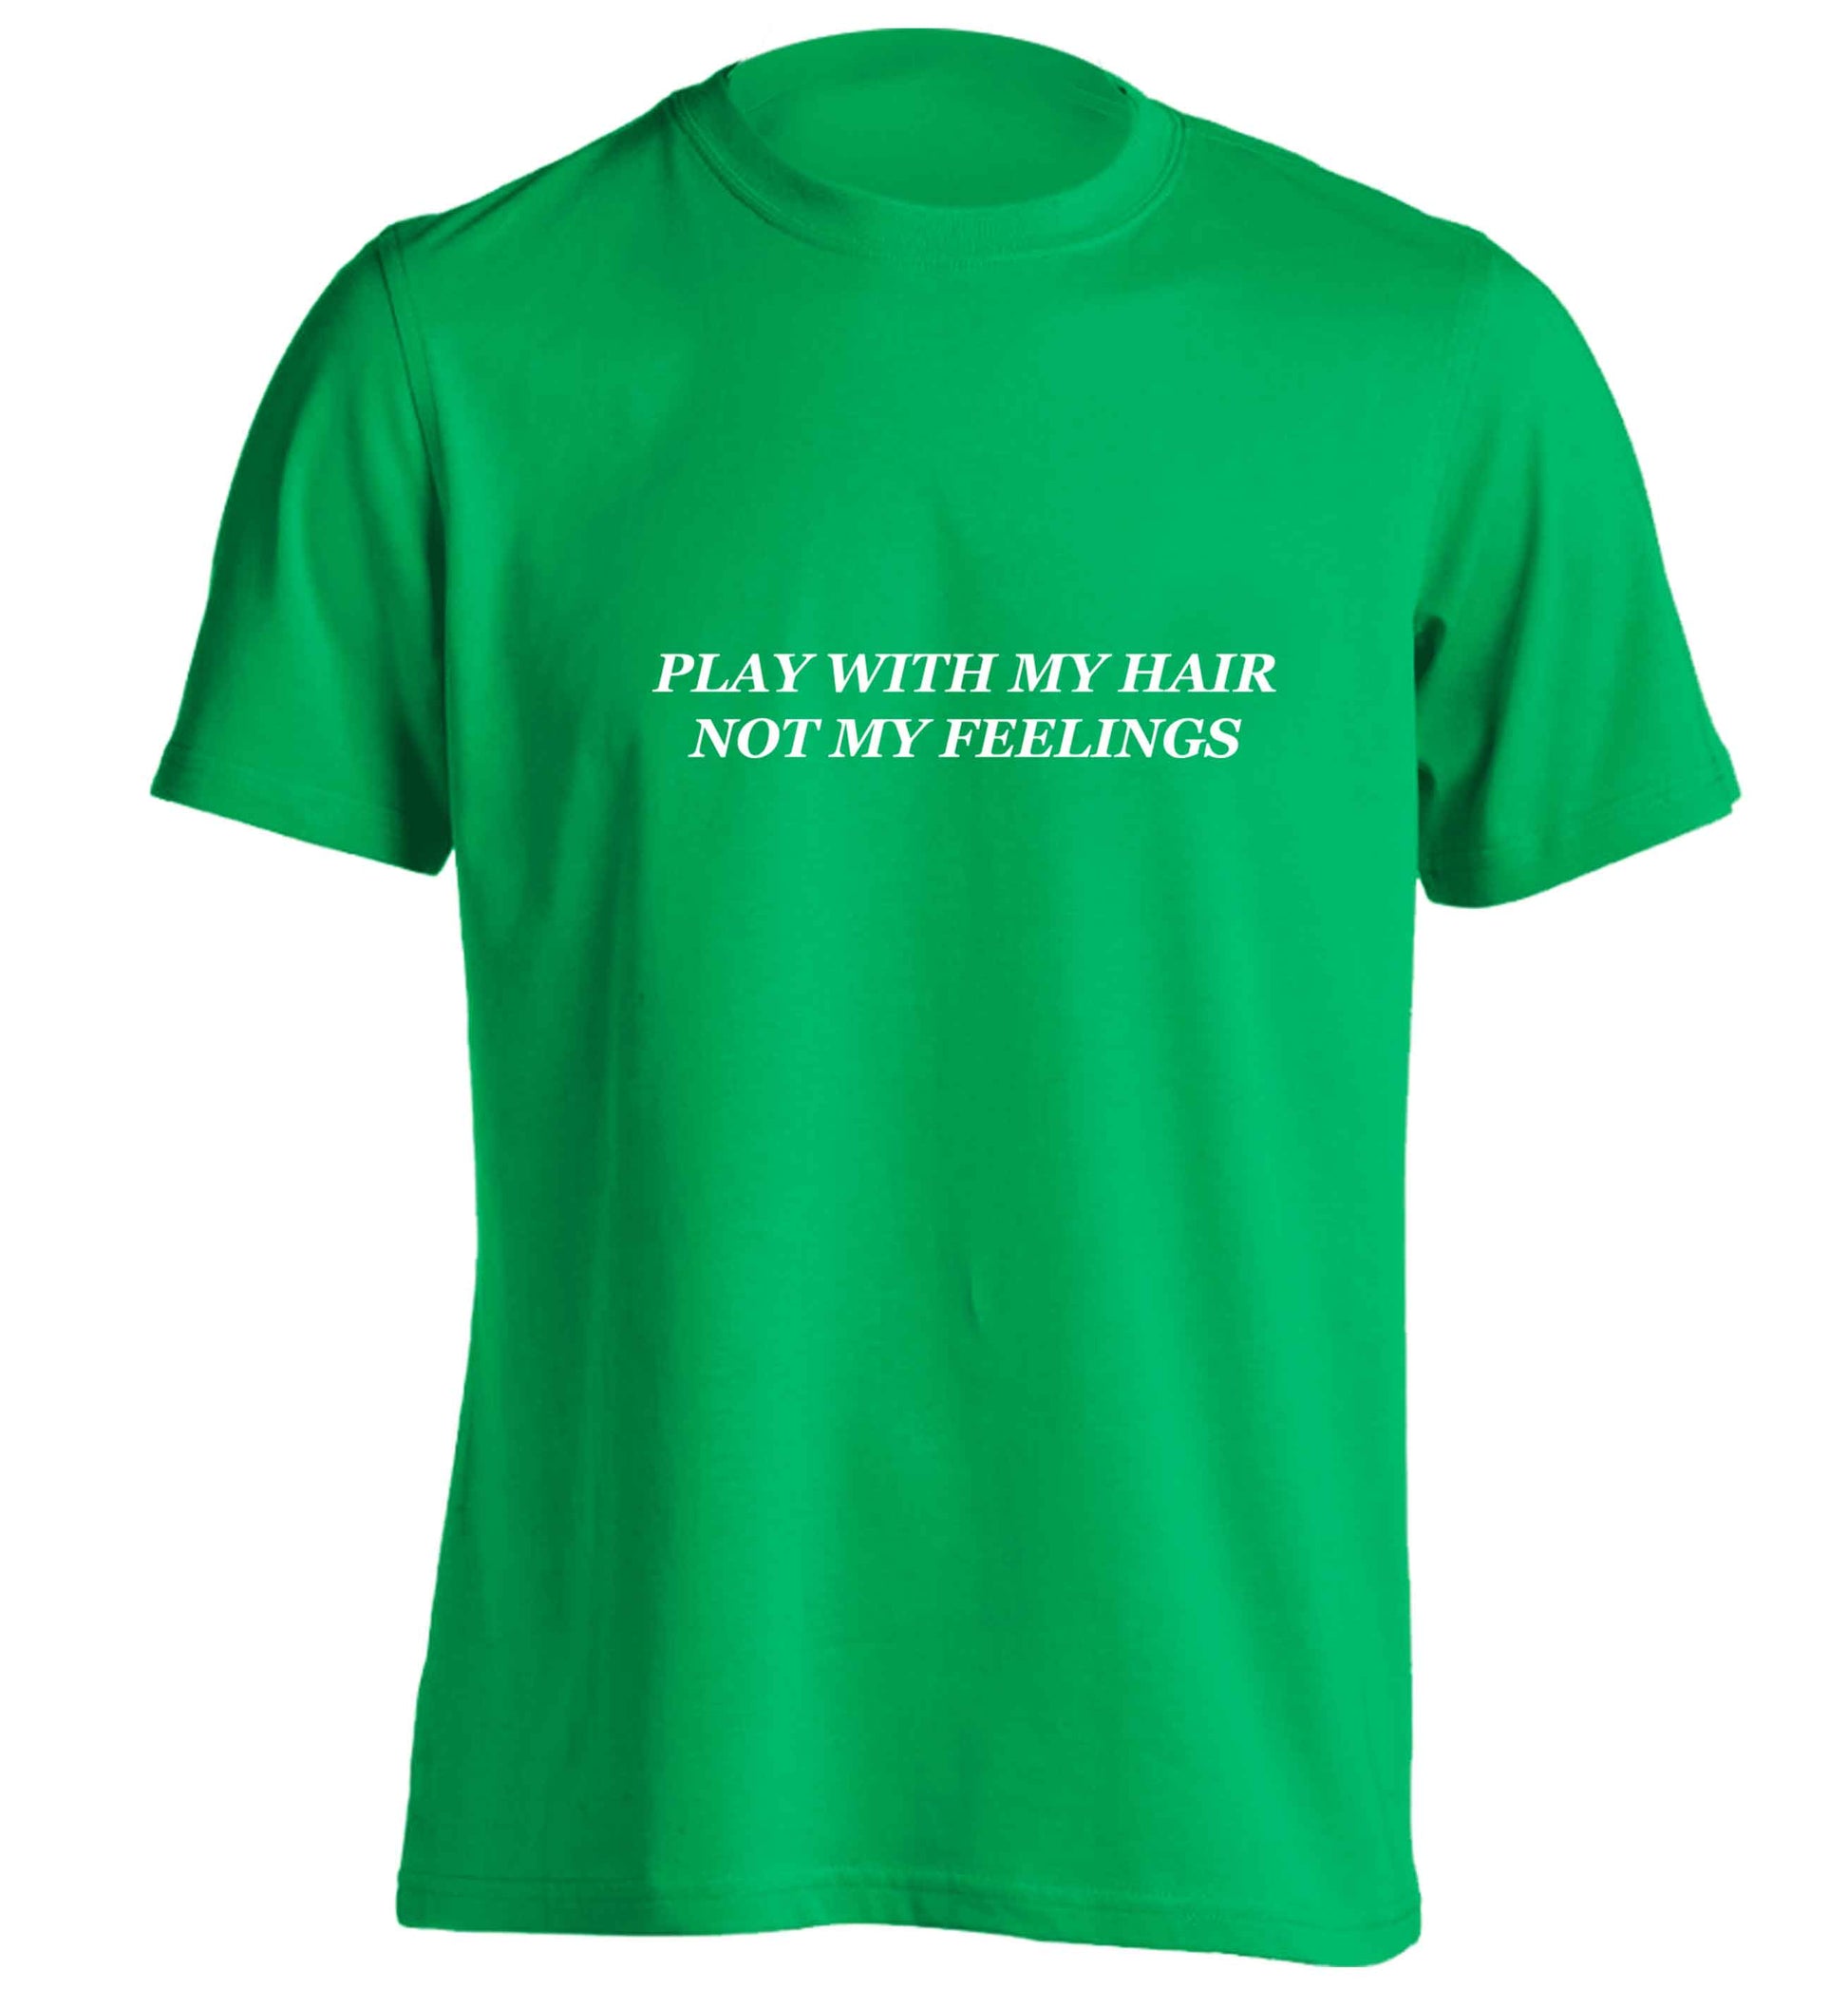 Play with my hair not my feelings adults unisex green Tshirt 2XL